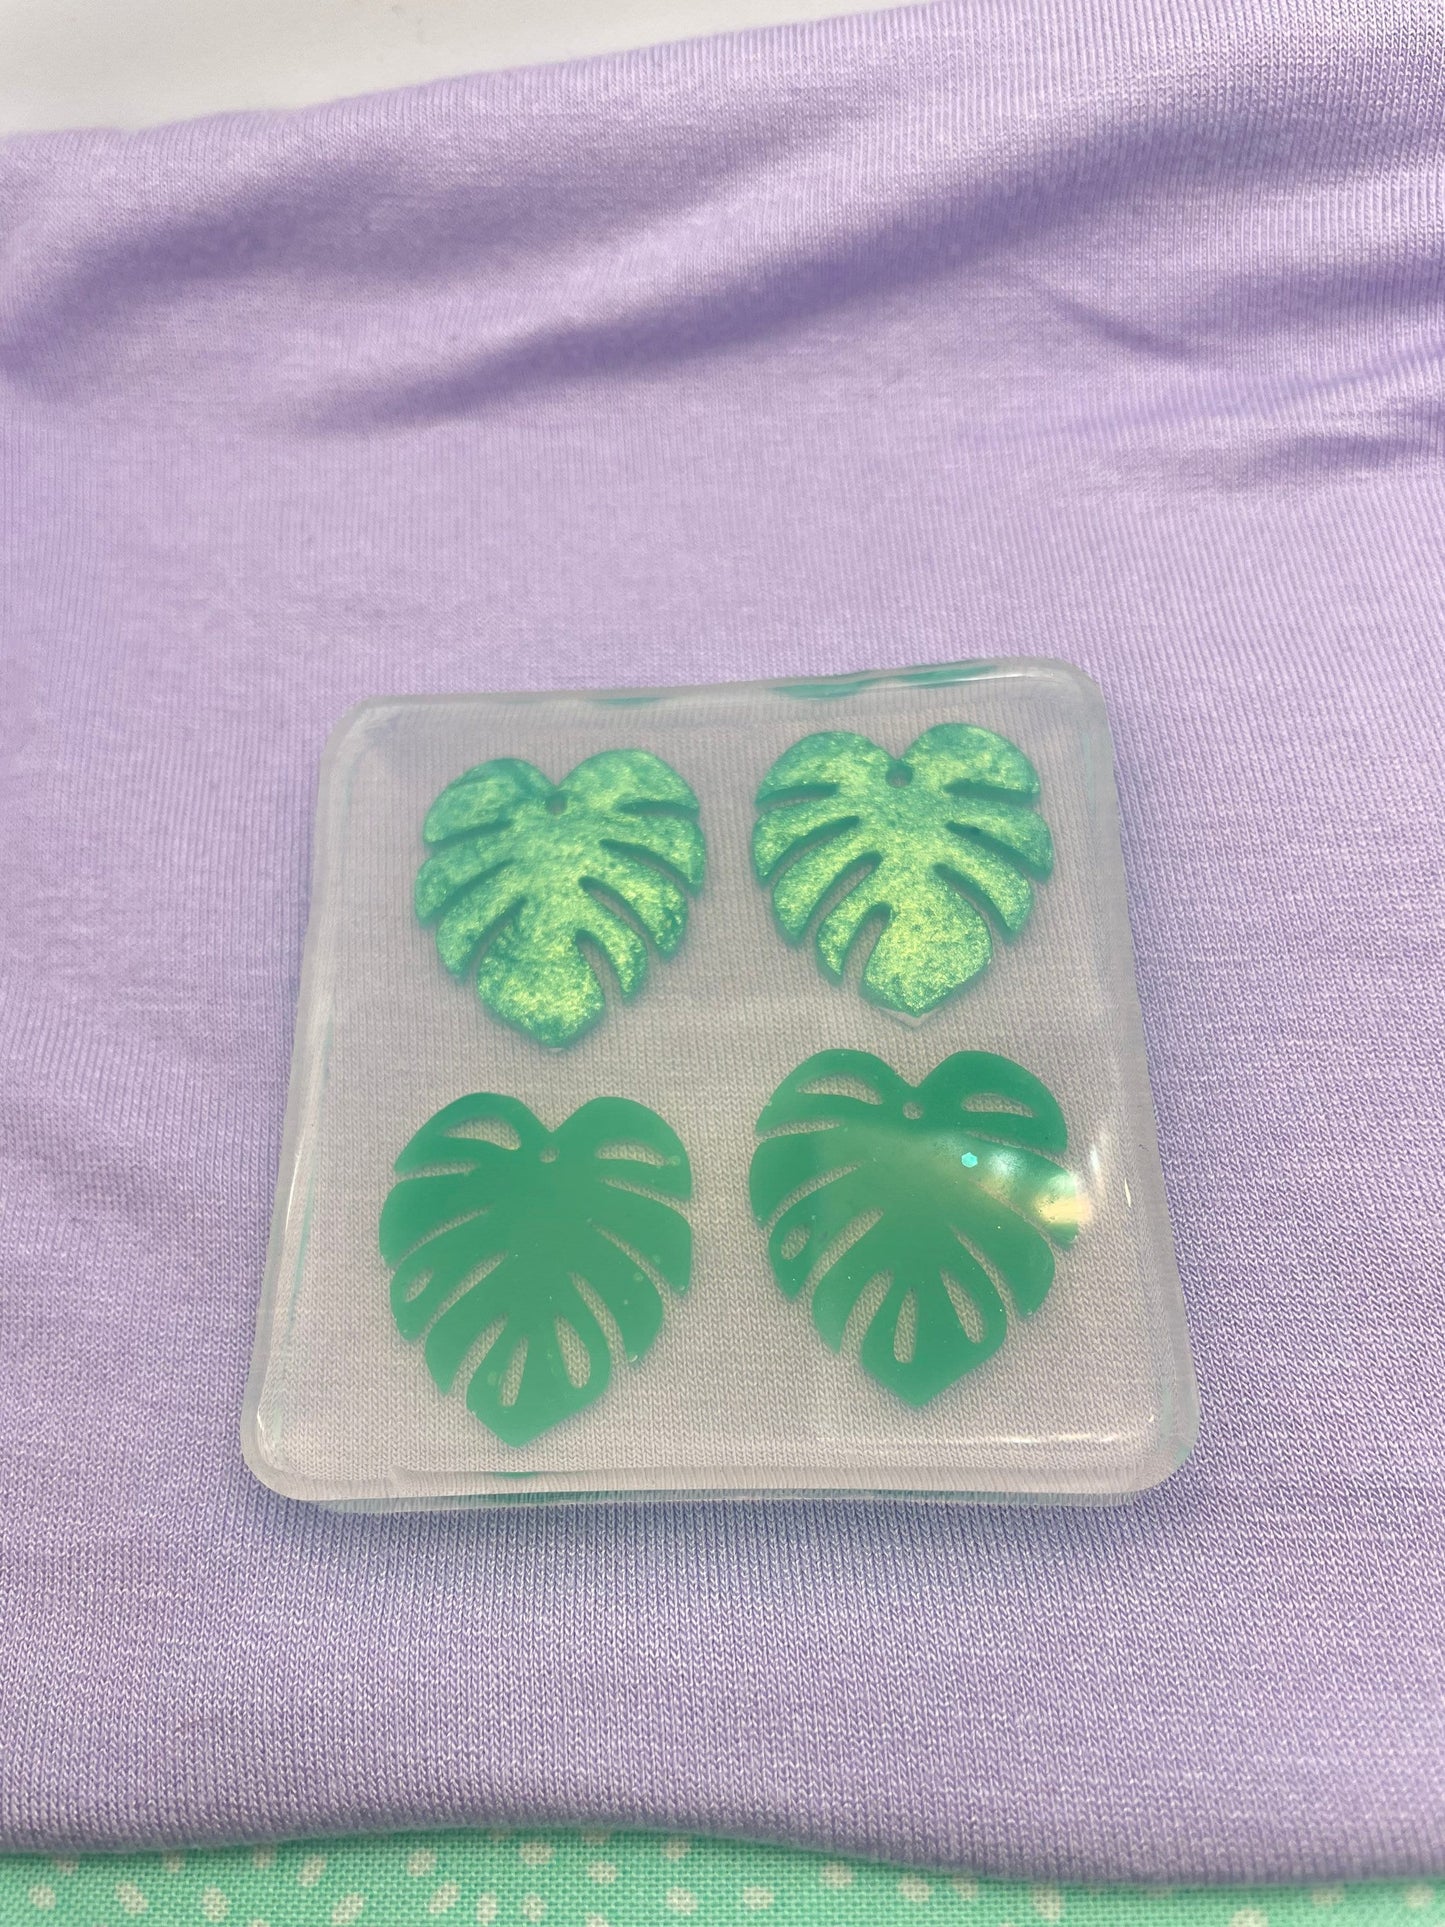 Small Monstera Leaf Dangle Earring Mould with pre-drilled holes